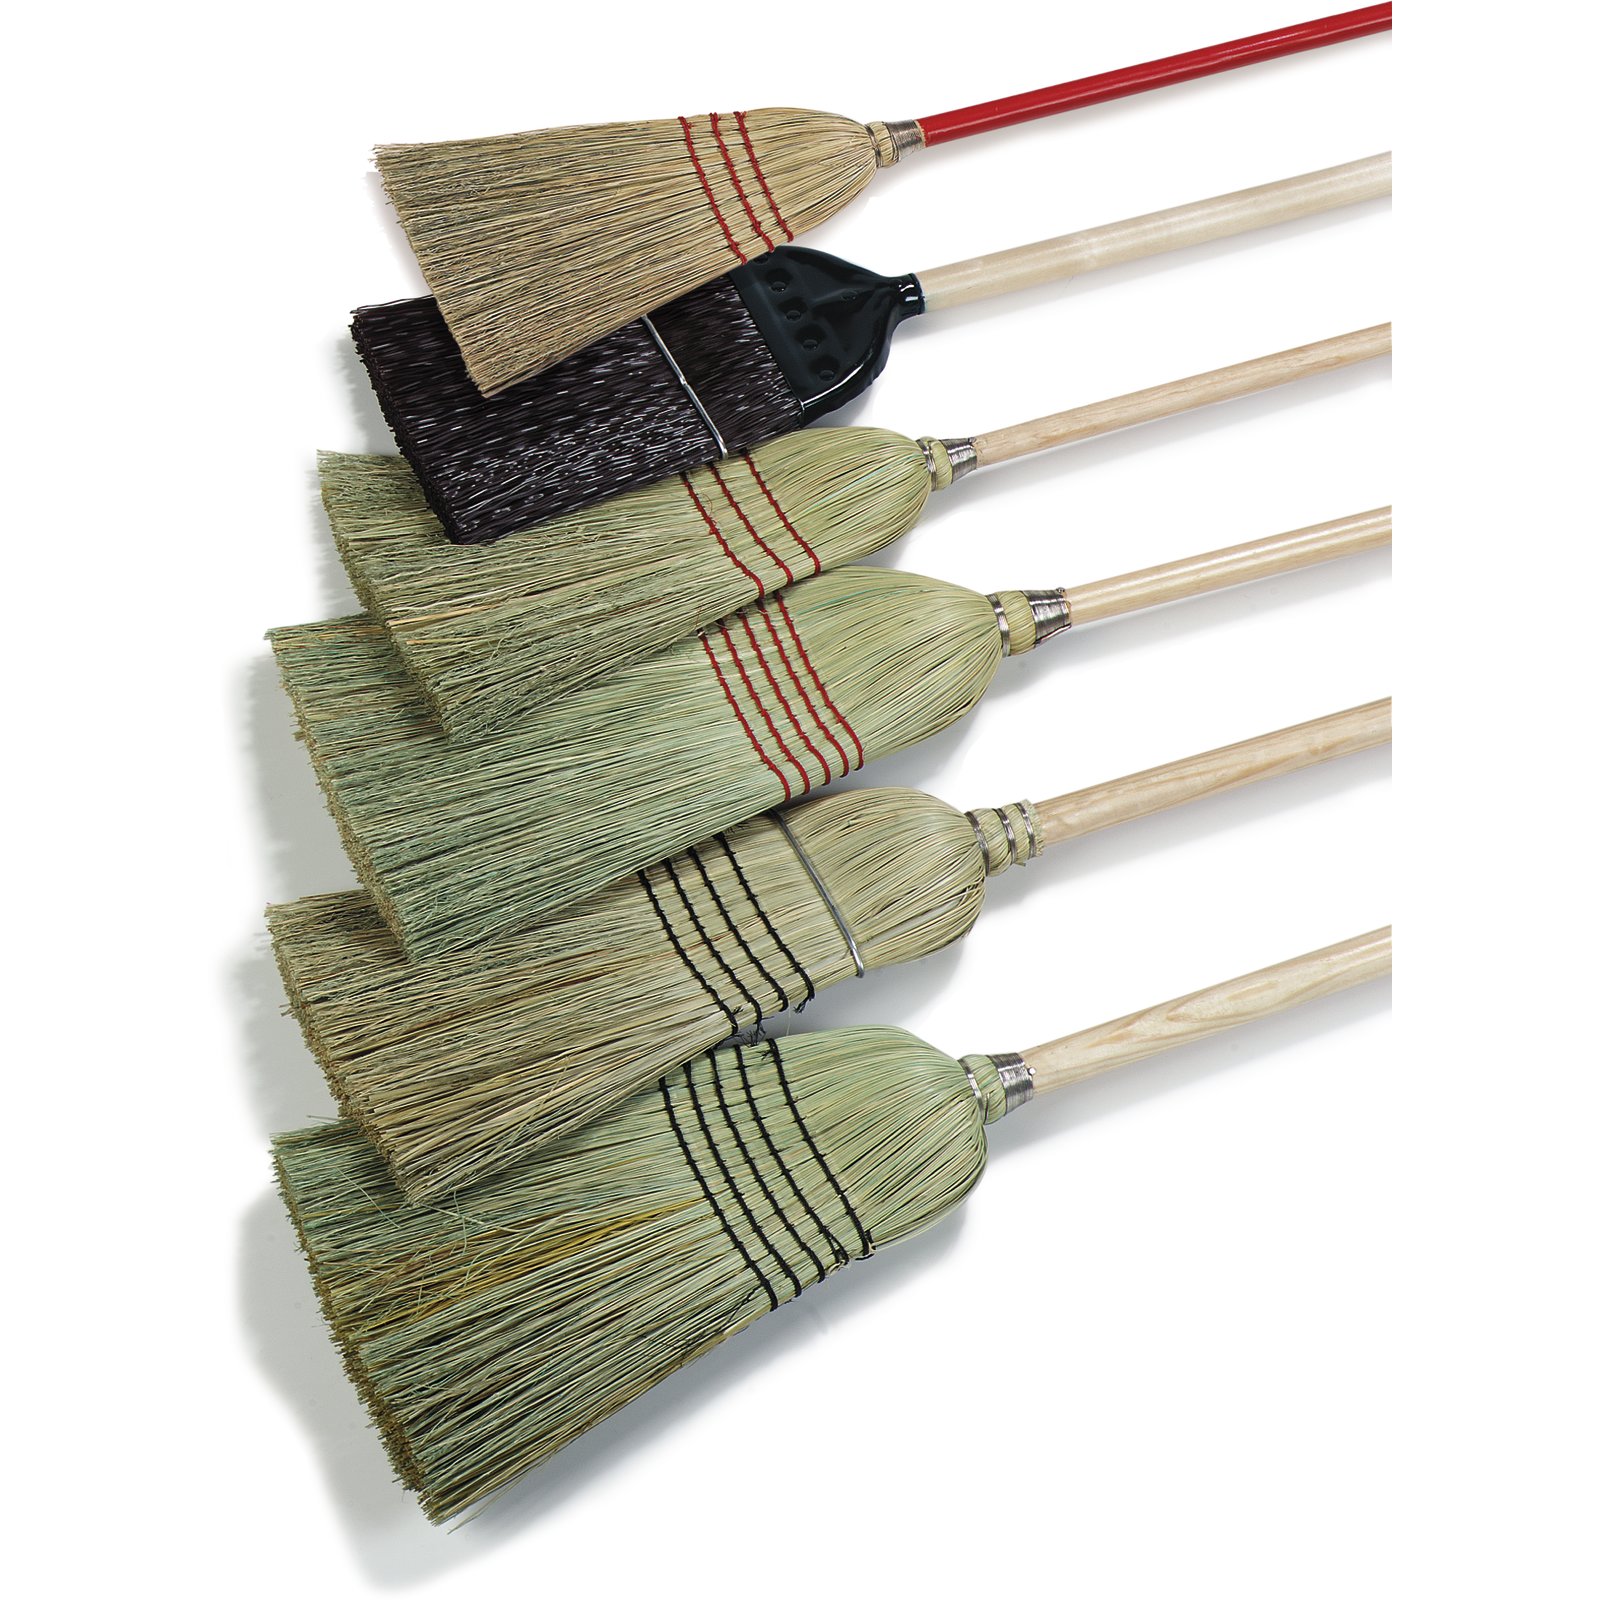 4135067 - 5-Stitch Warehouse/Janitor (#29) - Blended Corn Broom 56 